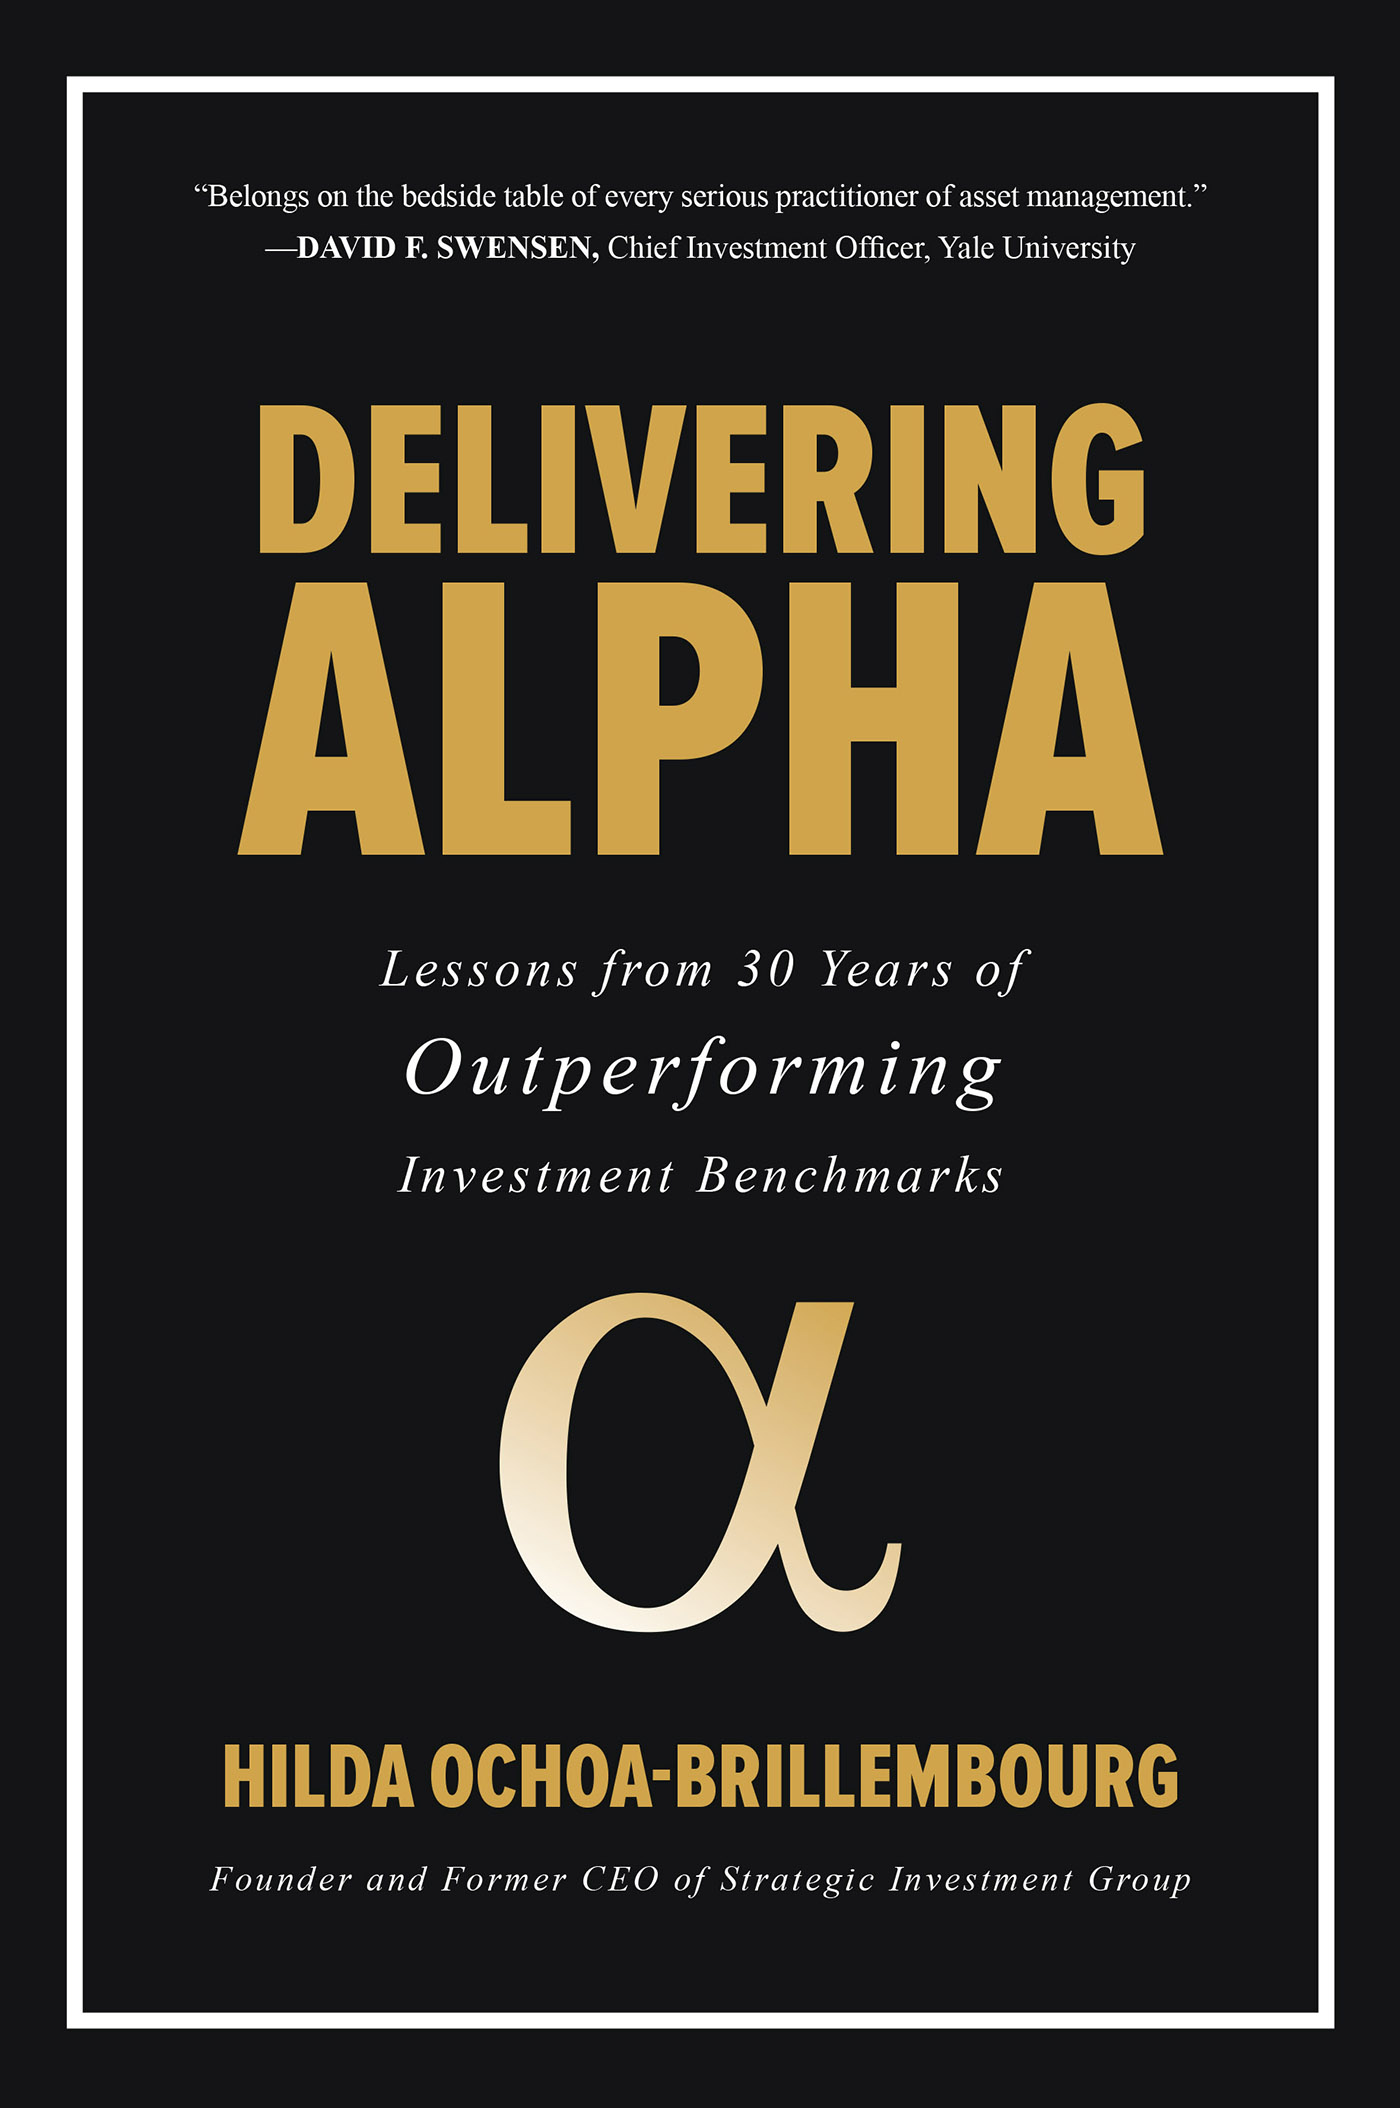 Praise for Delivering Alpha Ochoa-Brillembourgs 30-year record140 basis points - photo 1